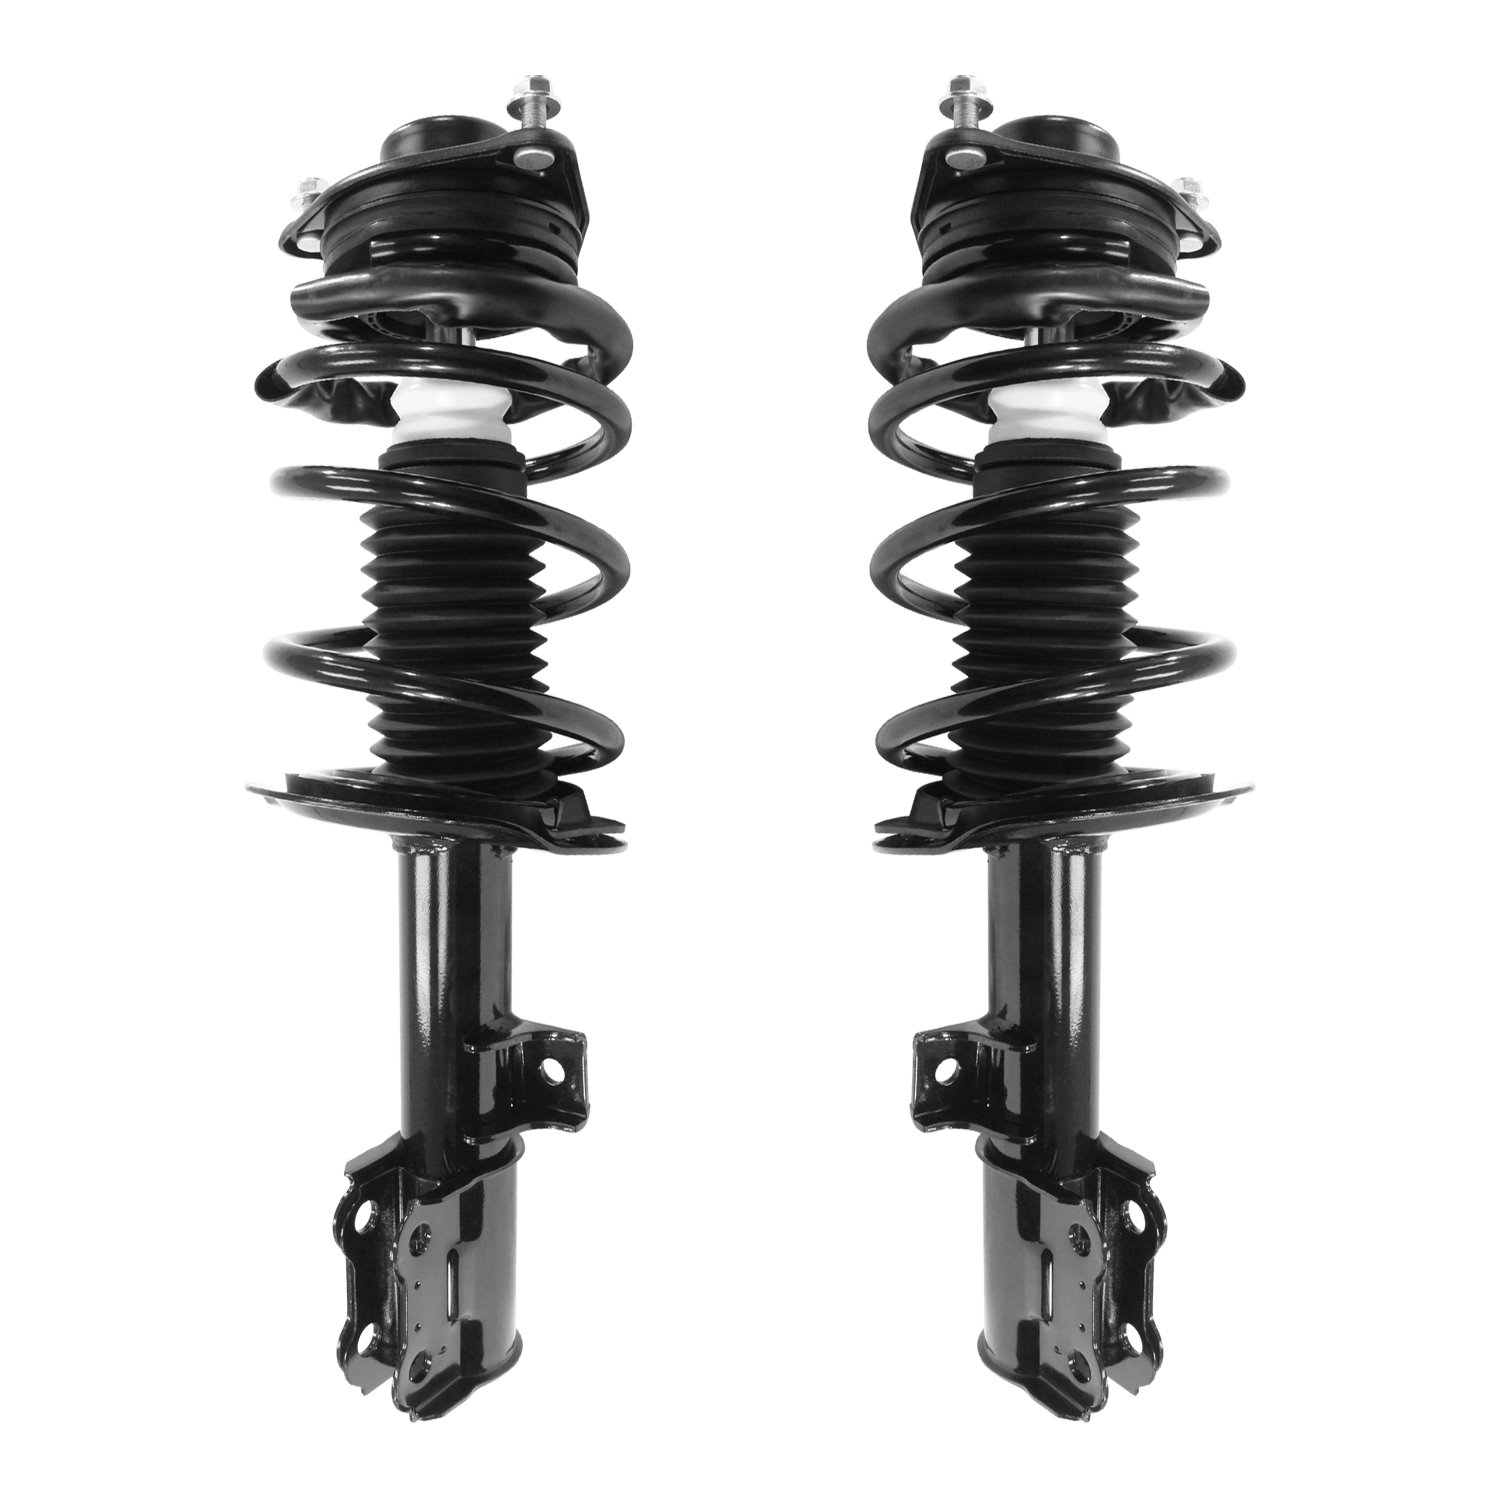 2-11163-11164-001 Suspension Strut & Coil Spring Assembly Set Fits Select Hyundai Genesis Coupe